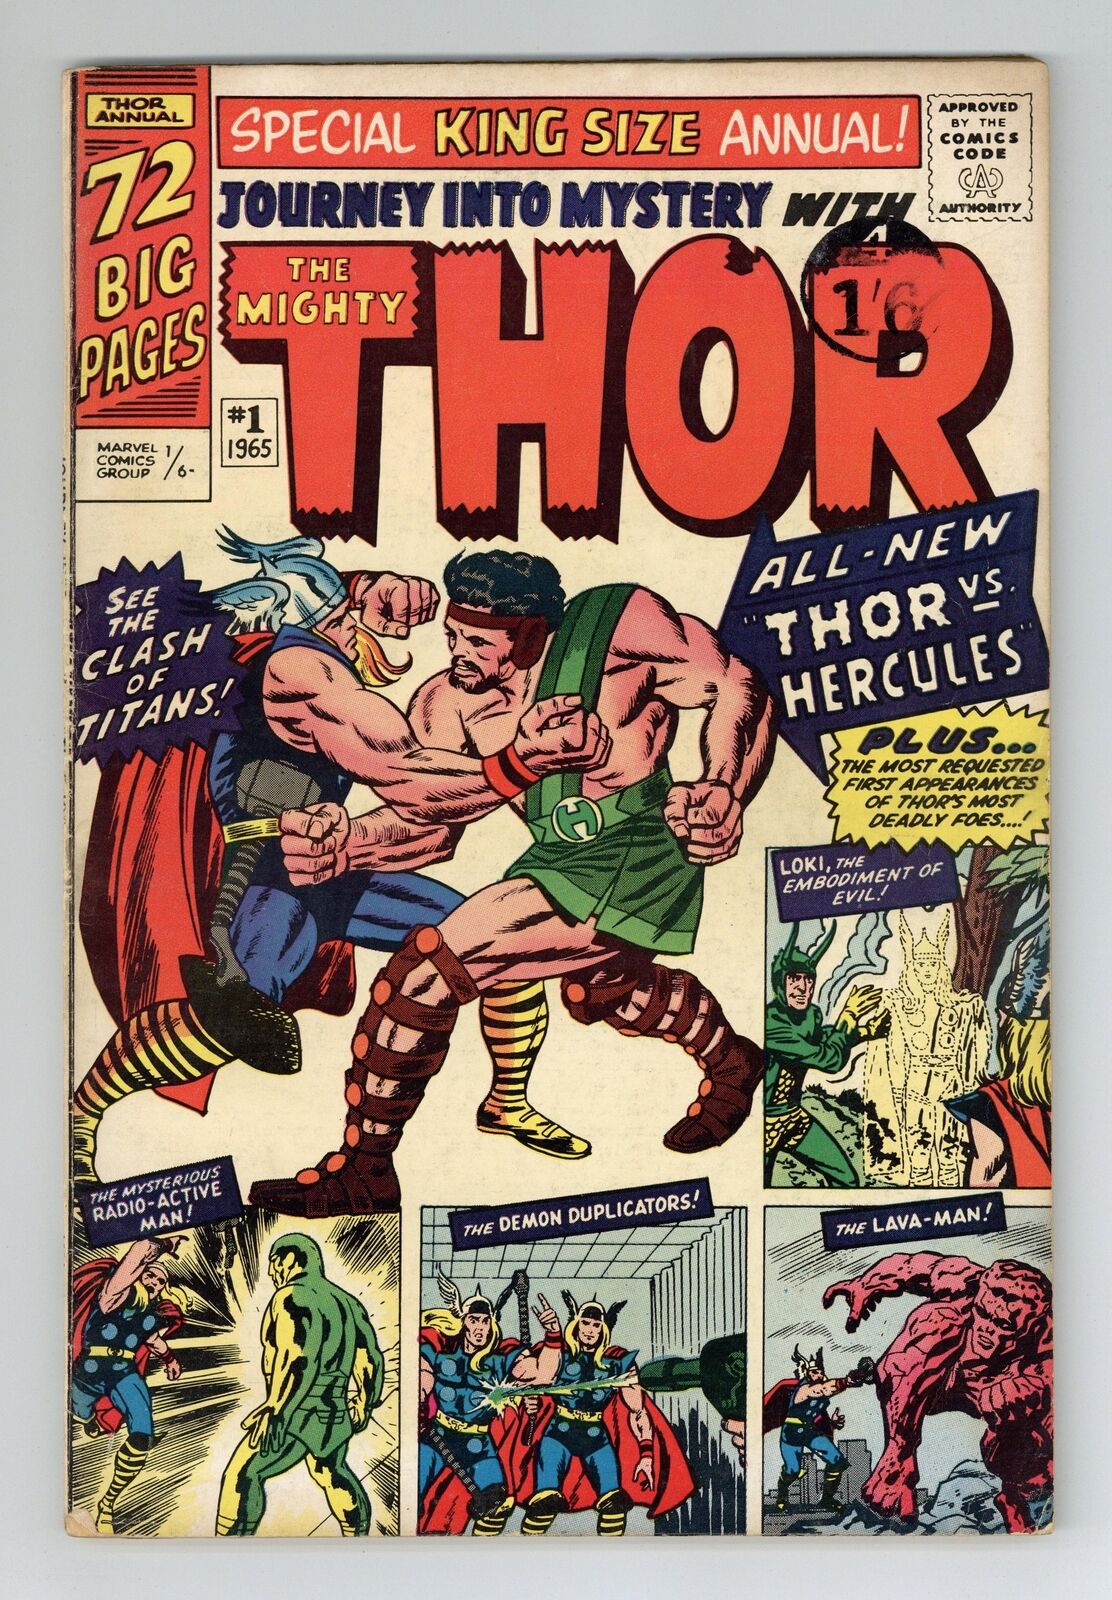 Thor Journey Into Mystery #1 VG+ 4.5 1965